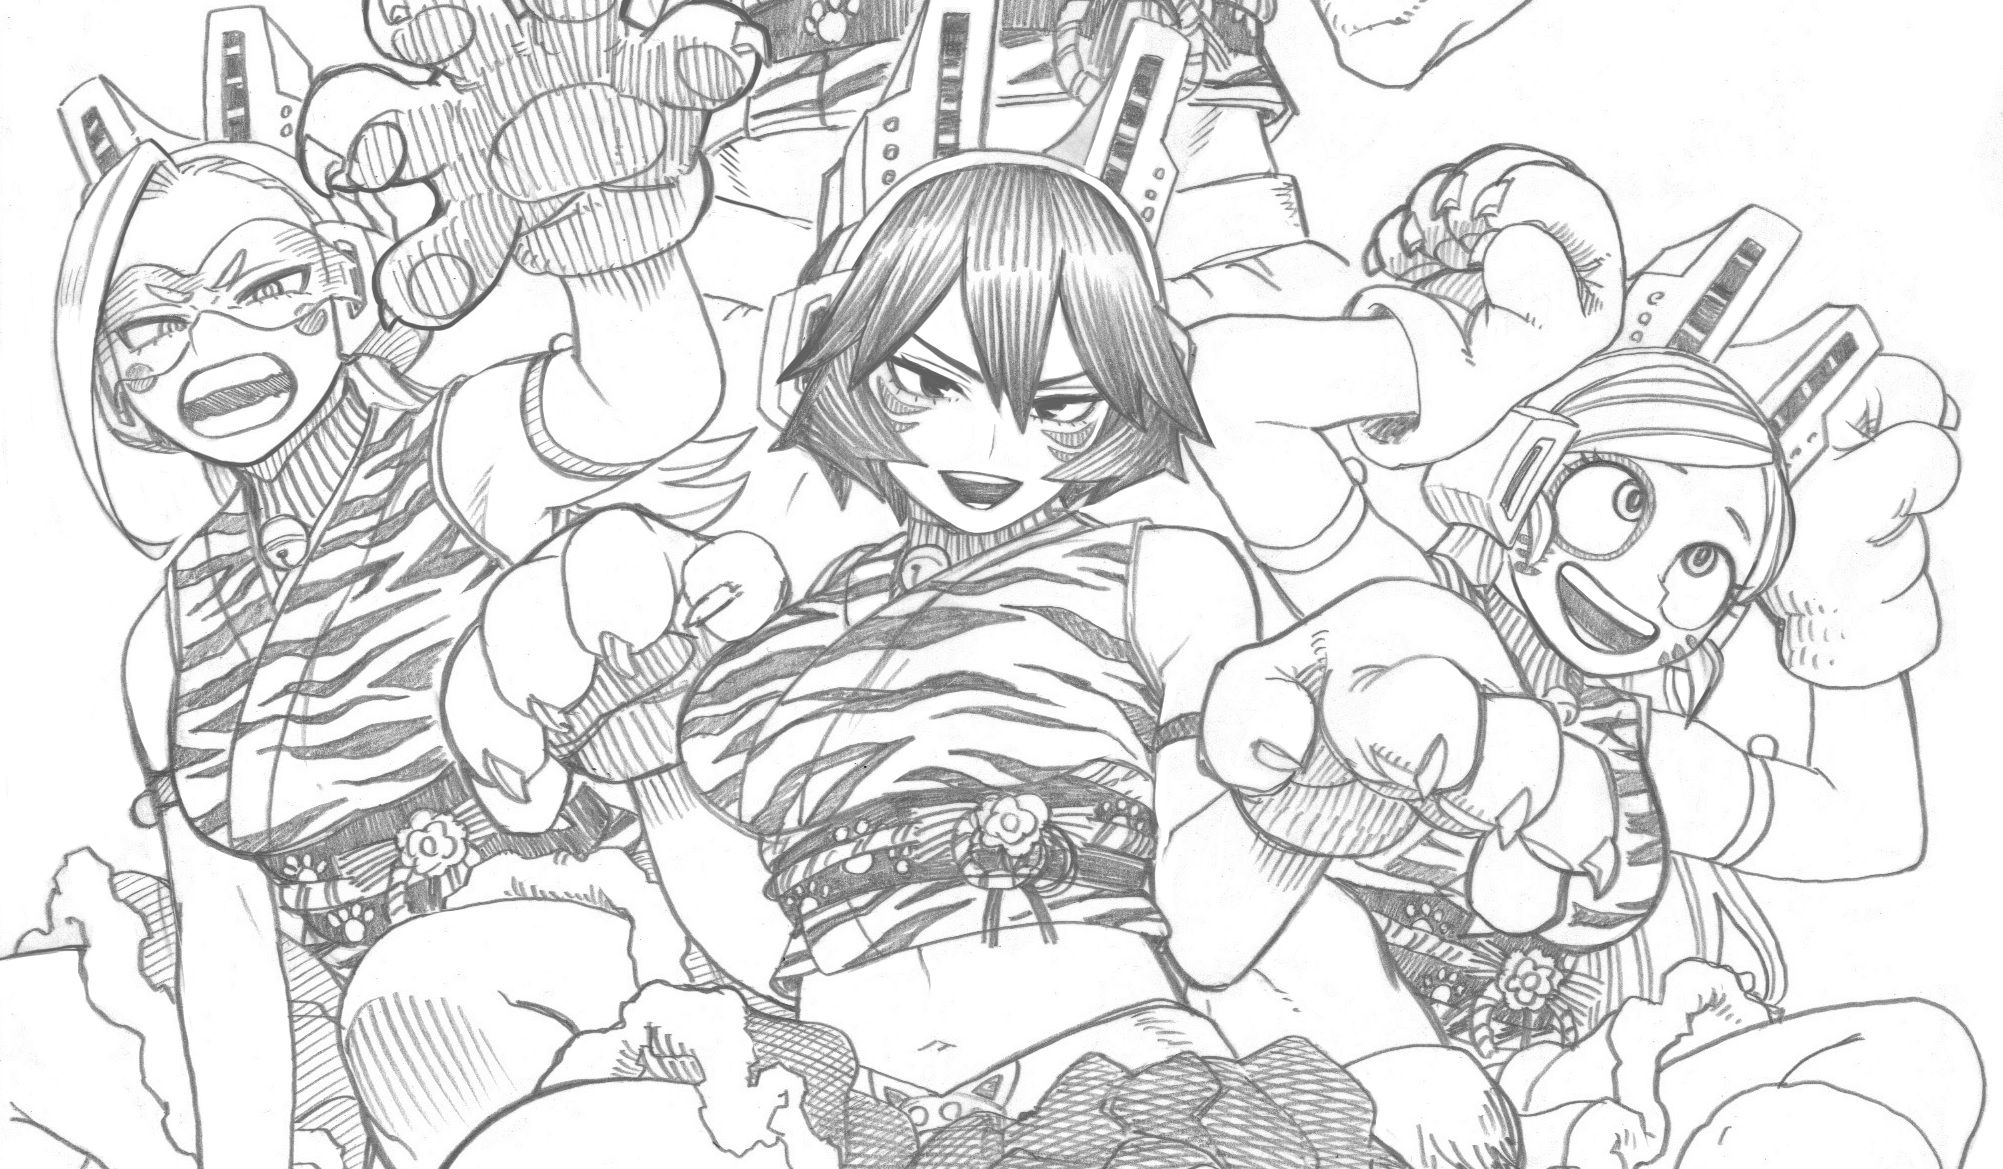 Is There a My Hero Academia Battle Royale Game Confirmed horikoshi official art from twitter